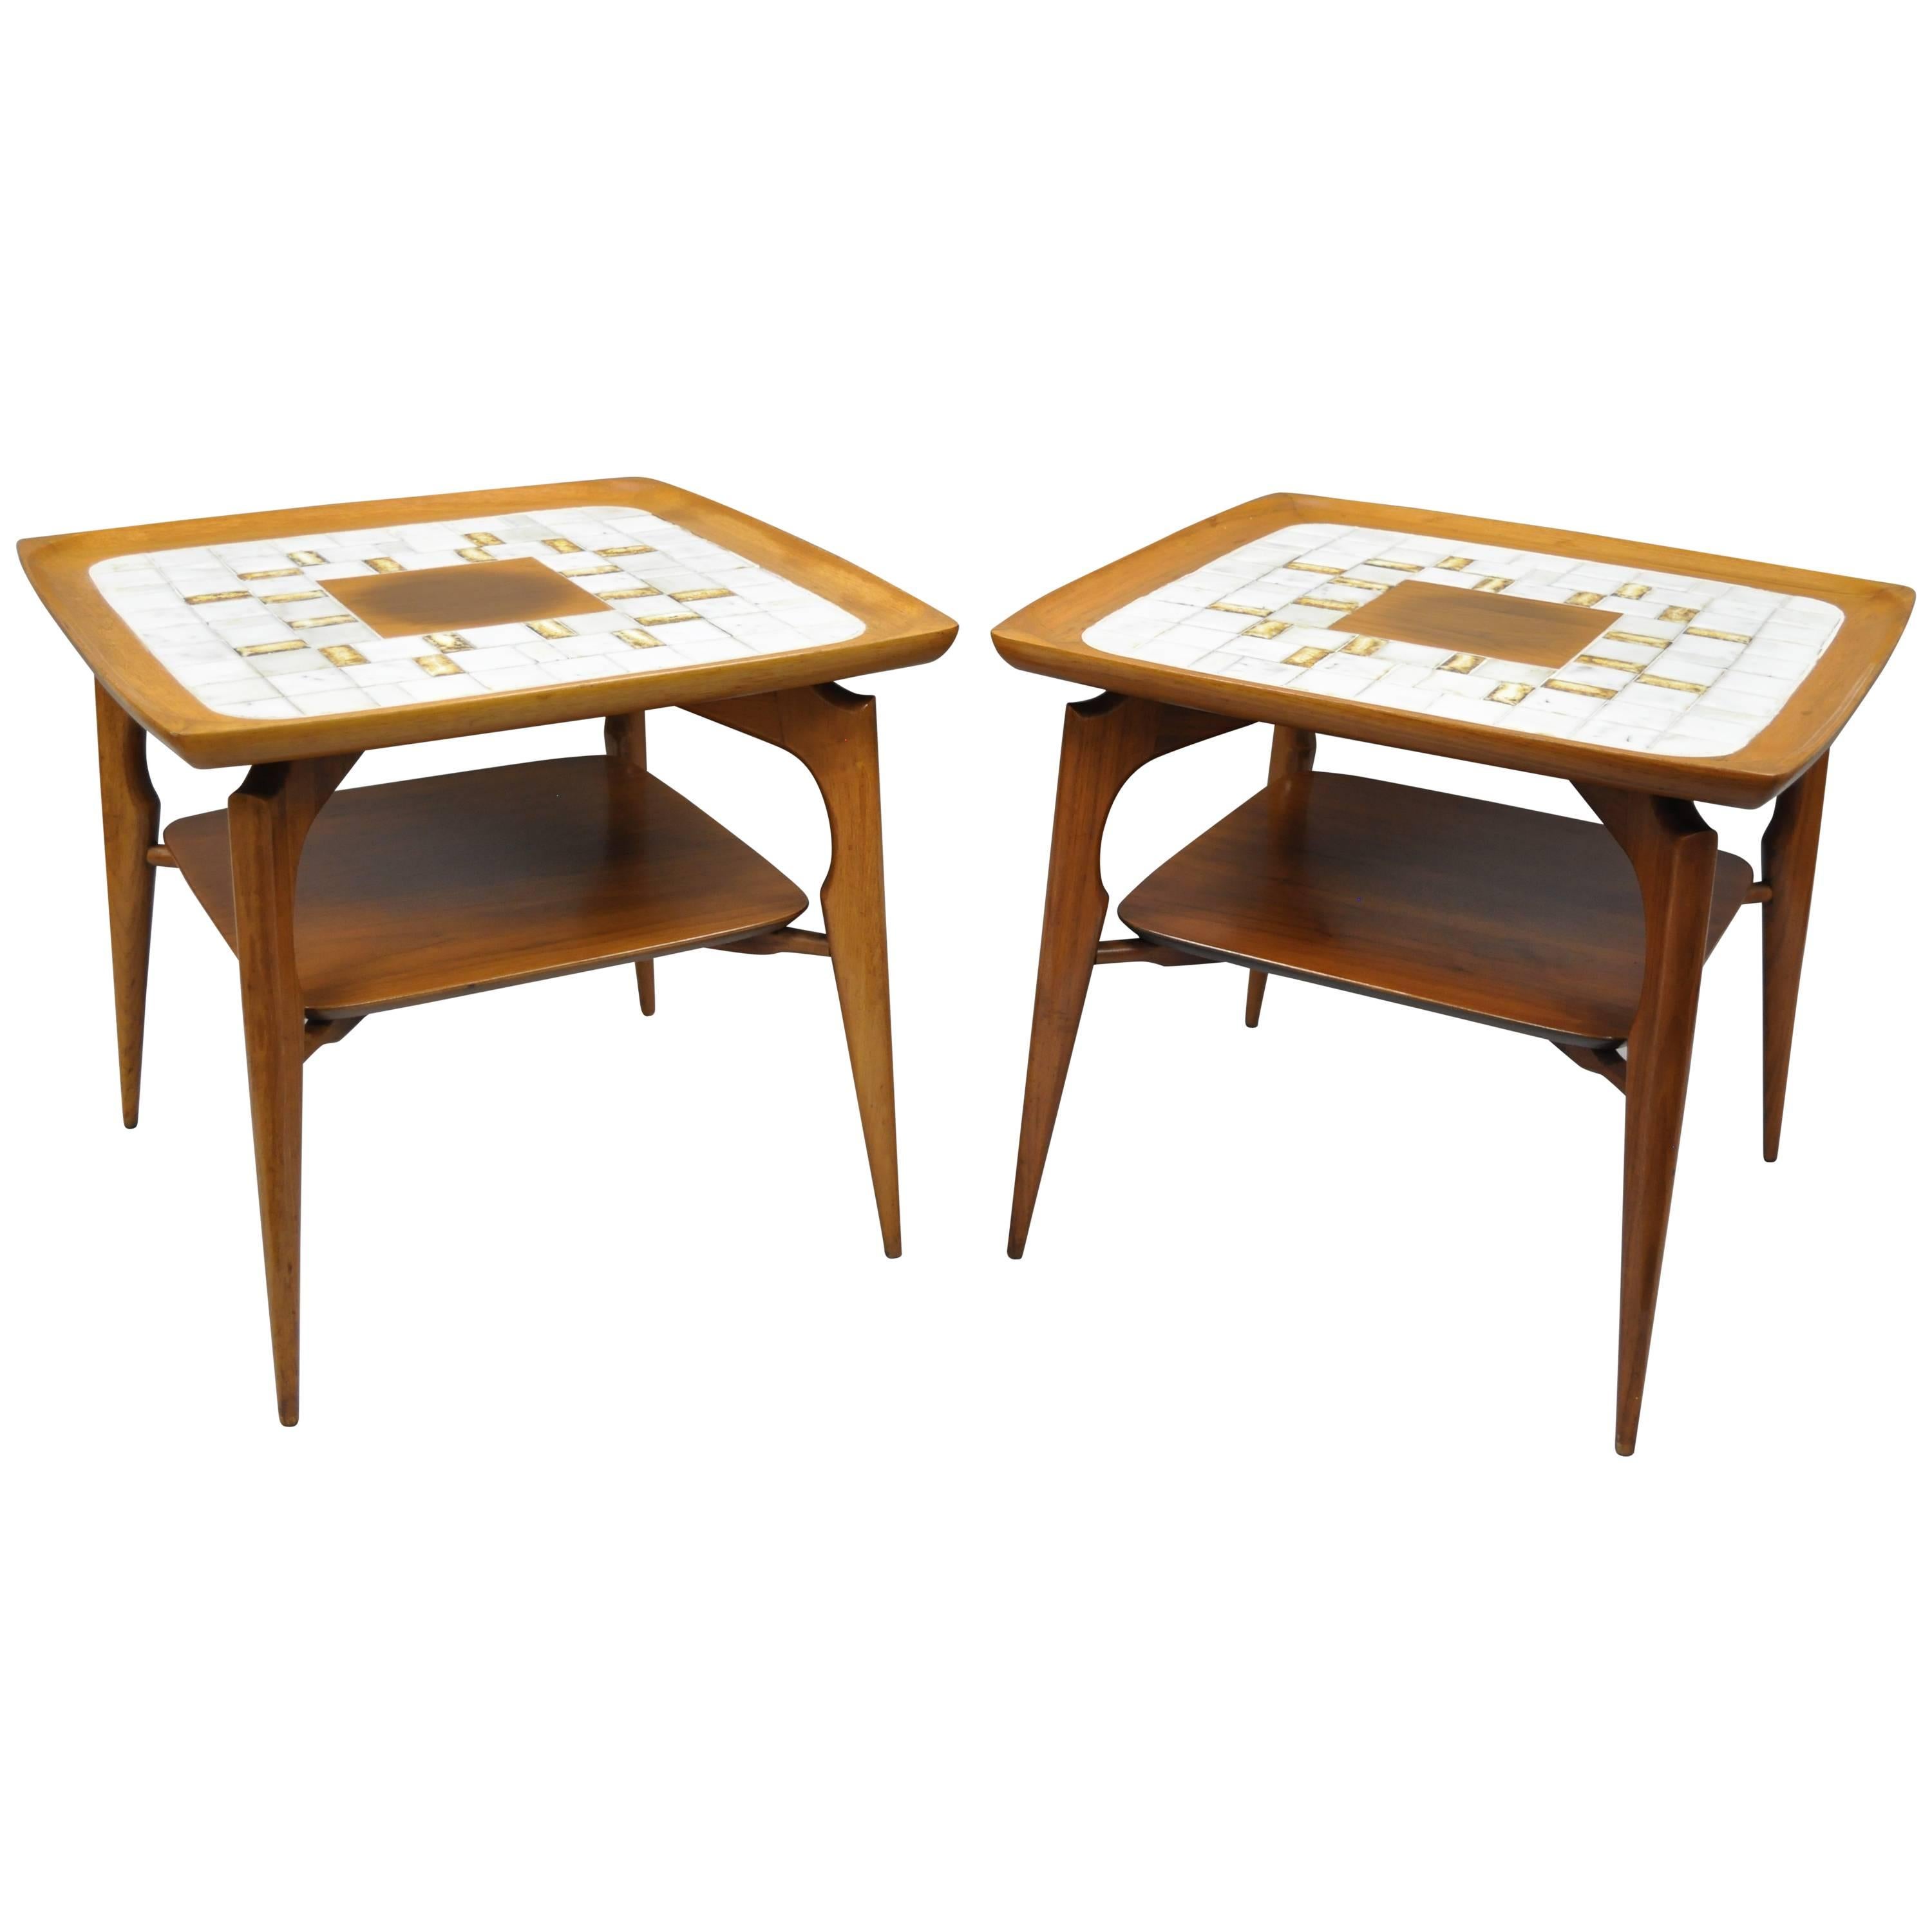 Pair of Mid Century Danish Modern Walnut & Tile Dish Top Sculptural End Tables For Sale